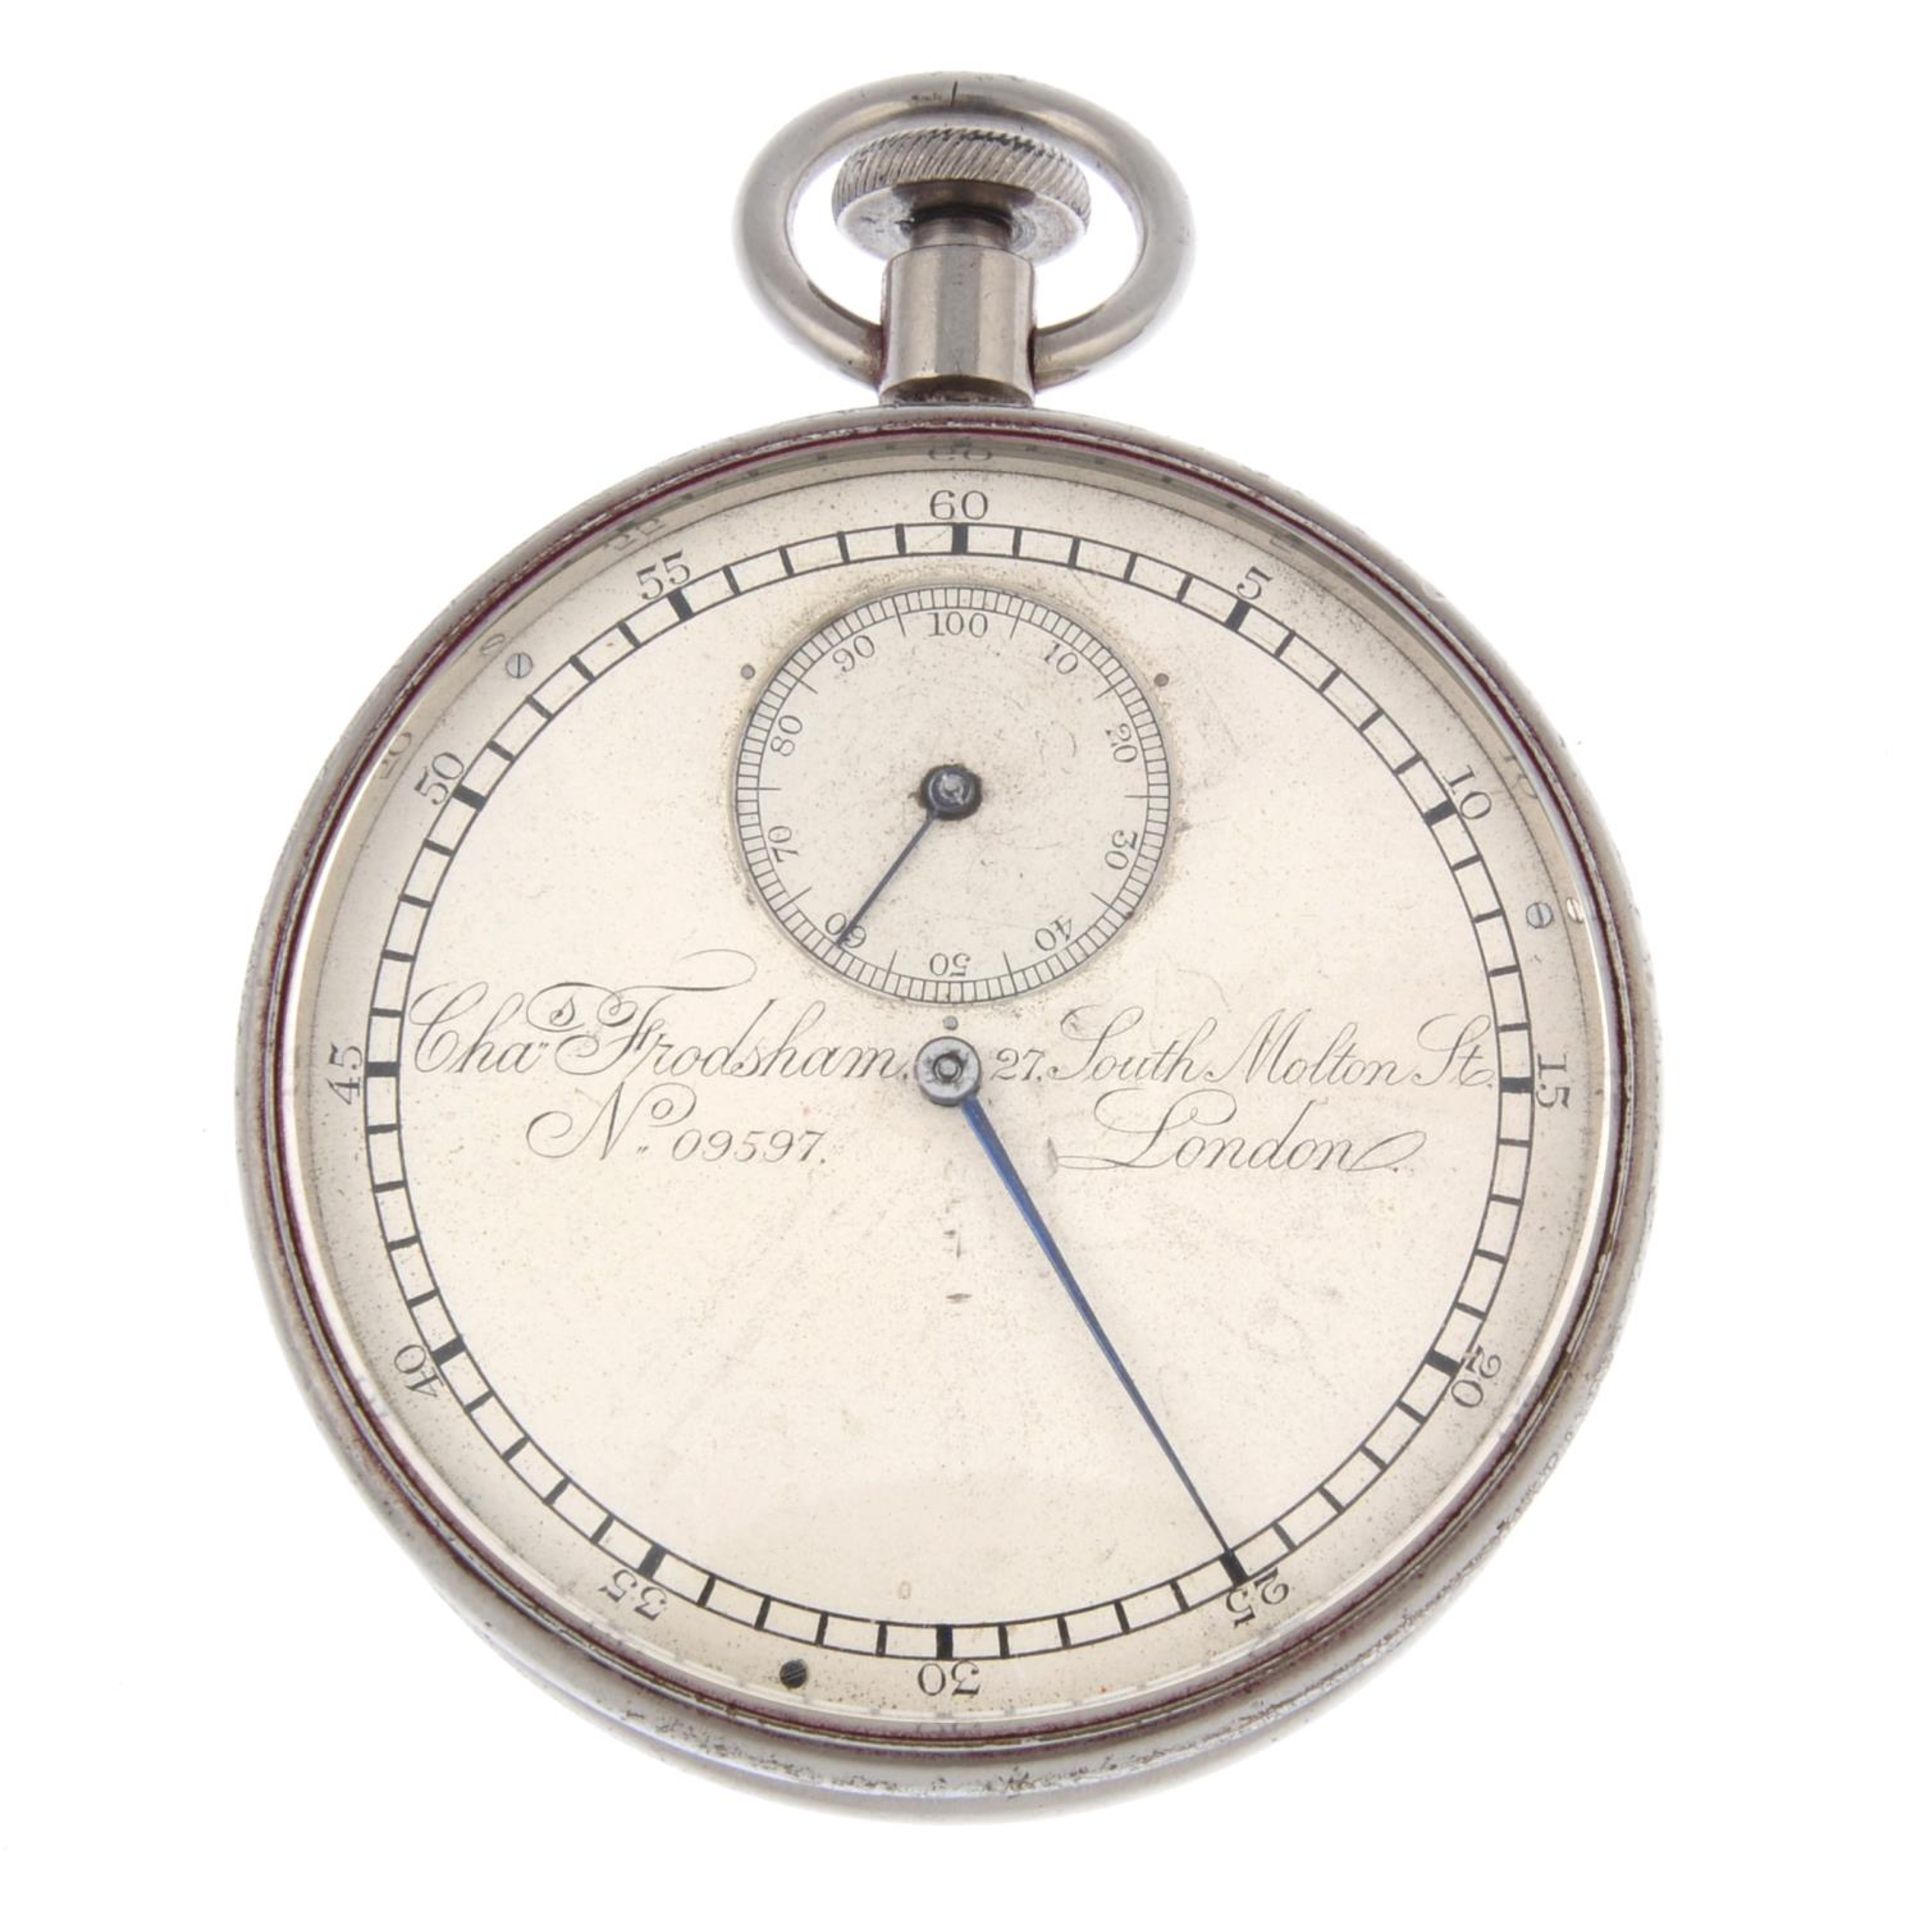 A flight timer by Charles Frodsham.